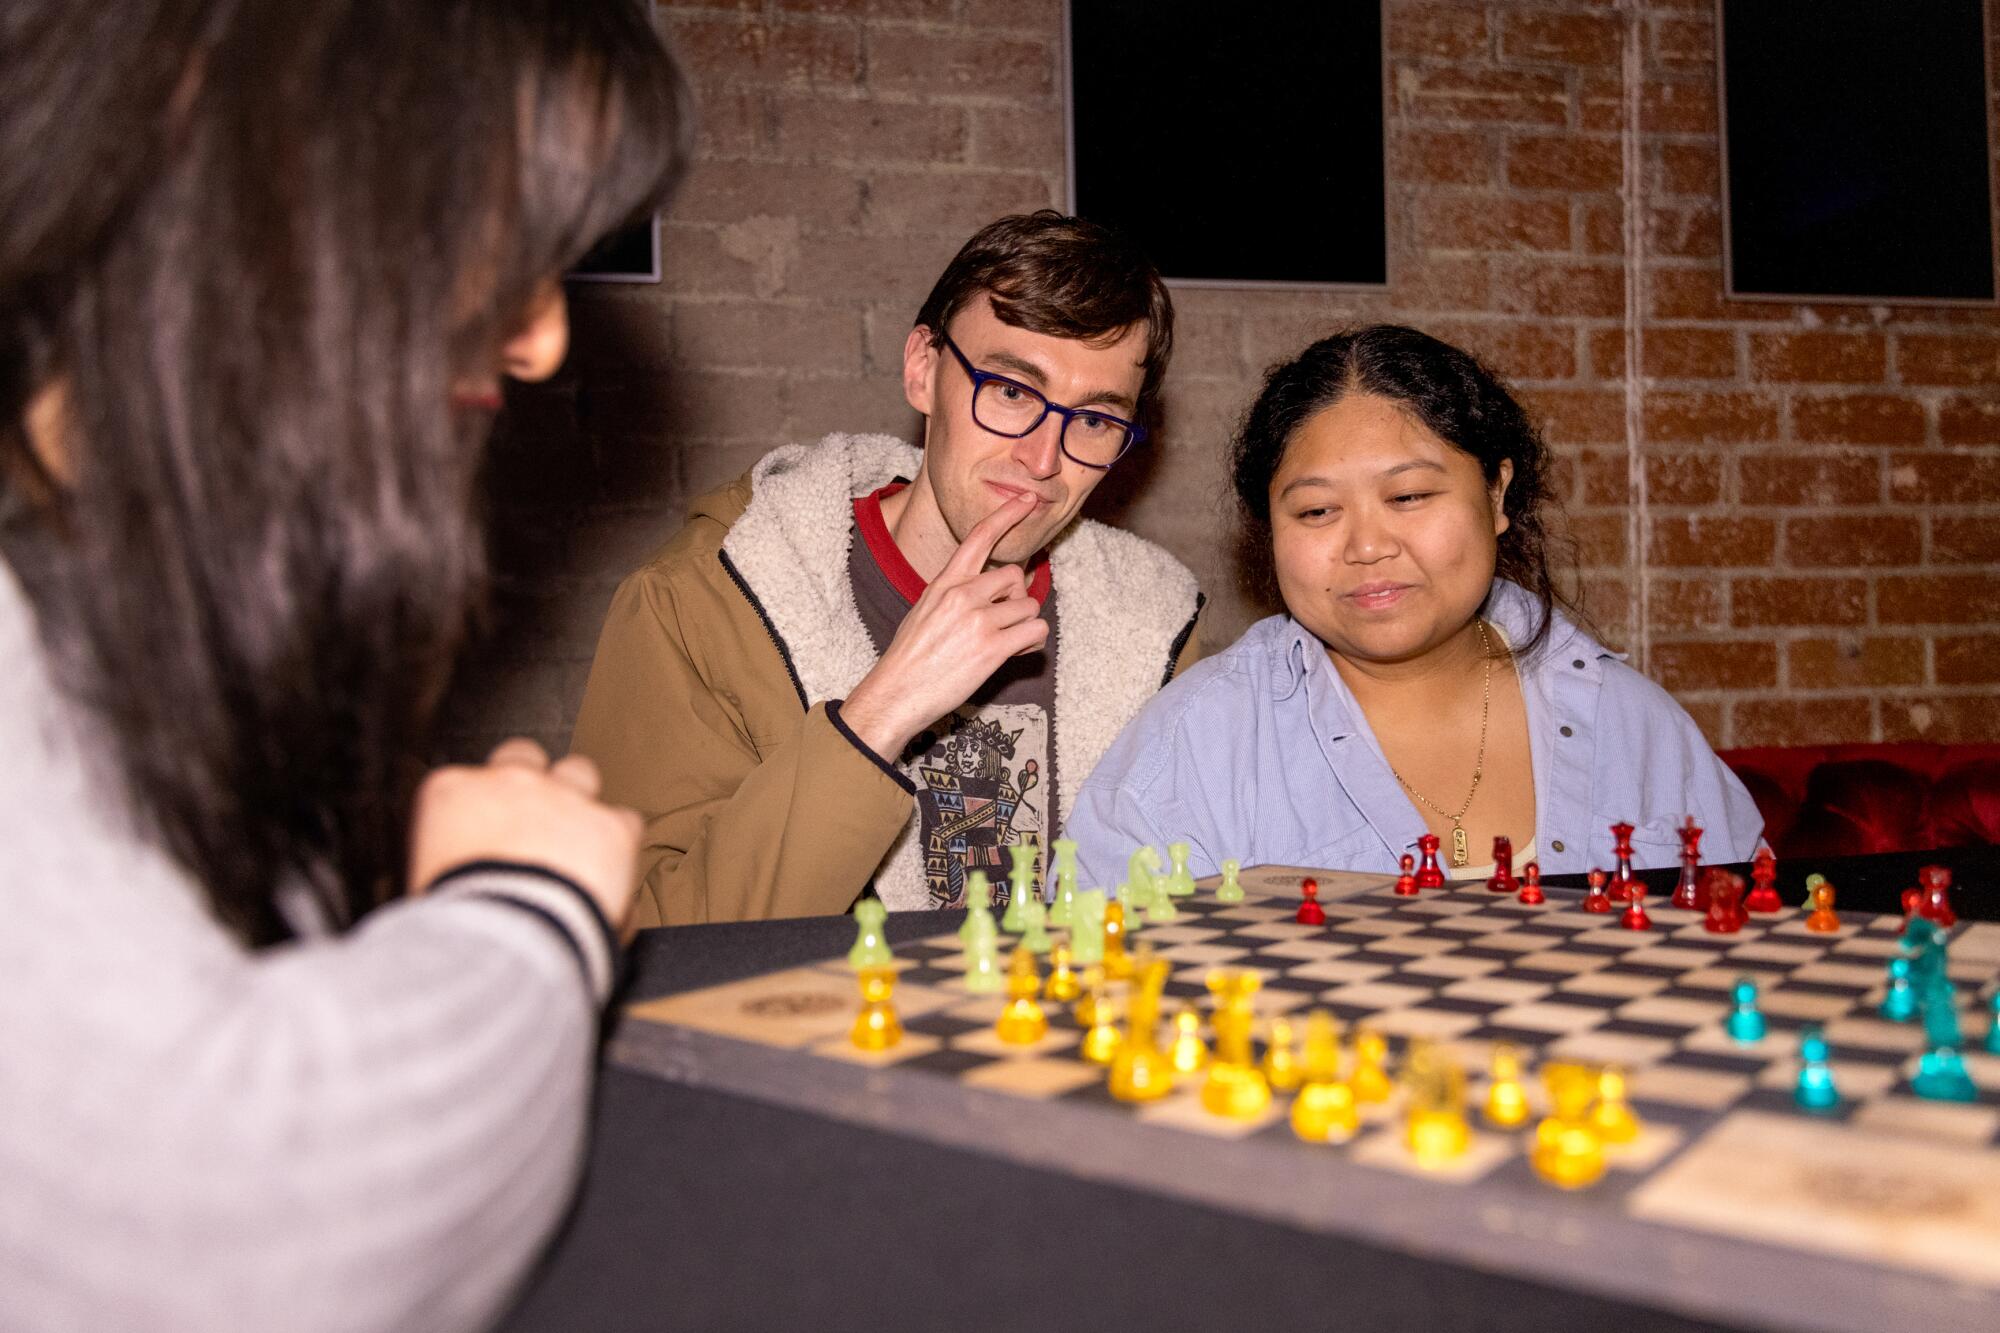 Three people play chess together on a multi-player board.